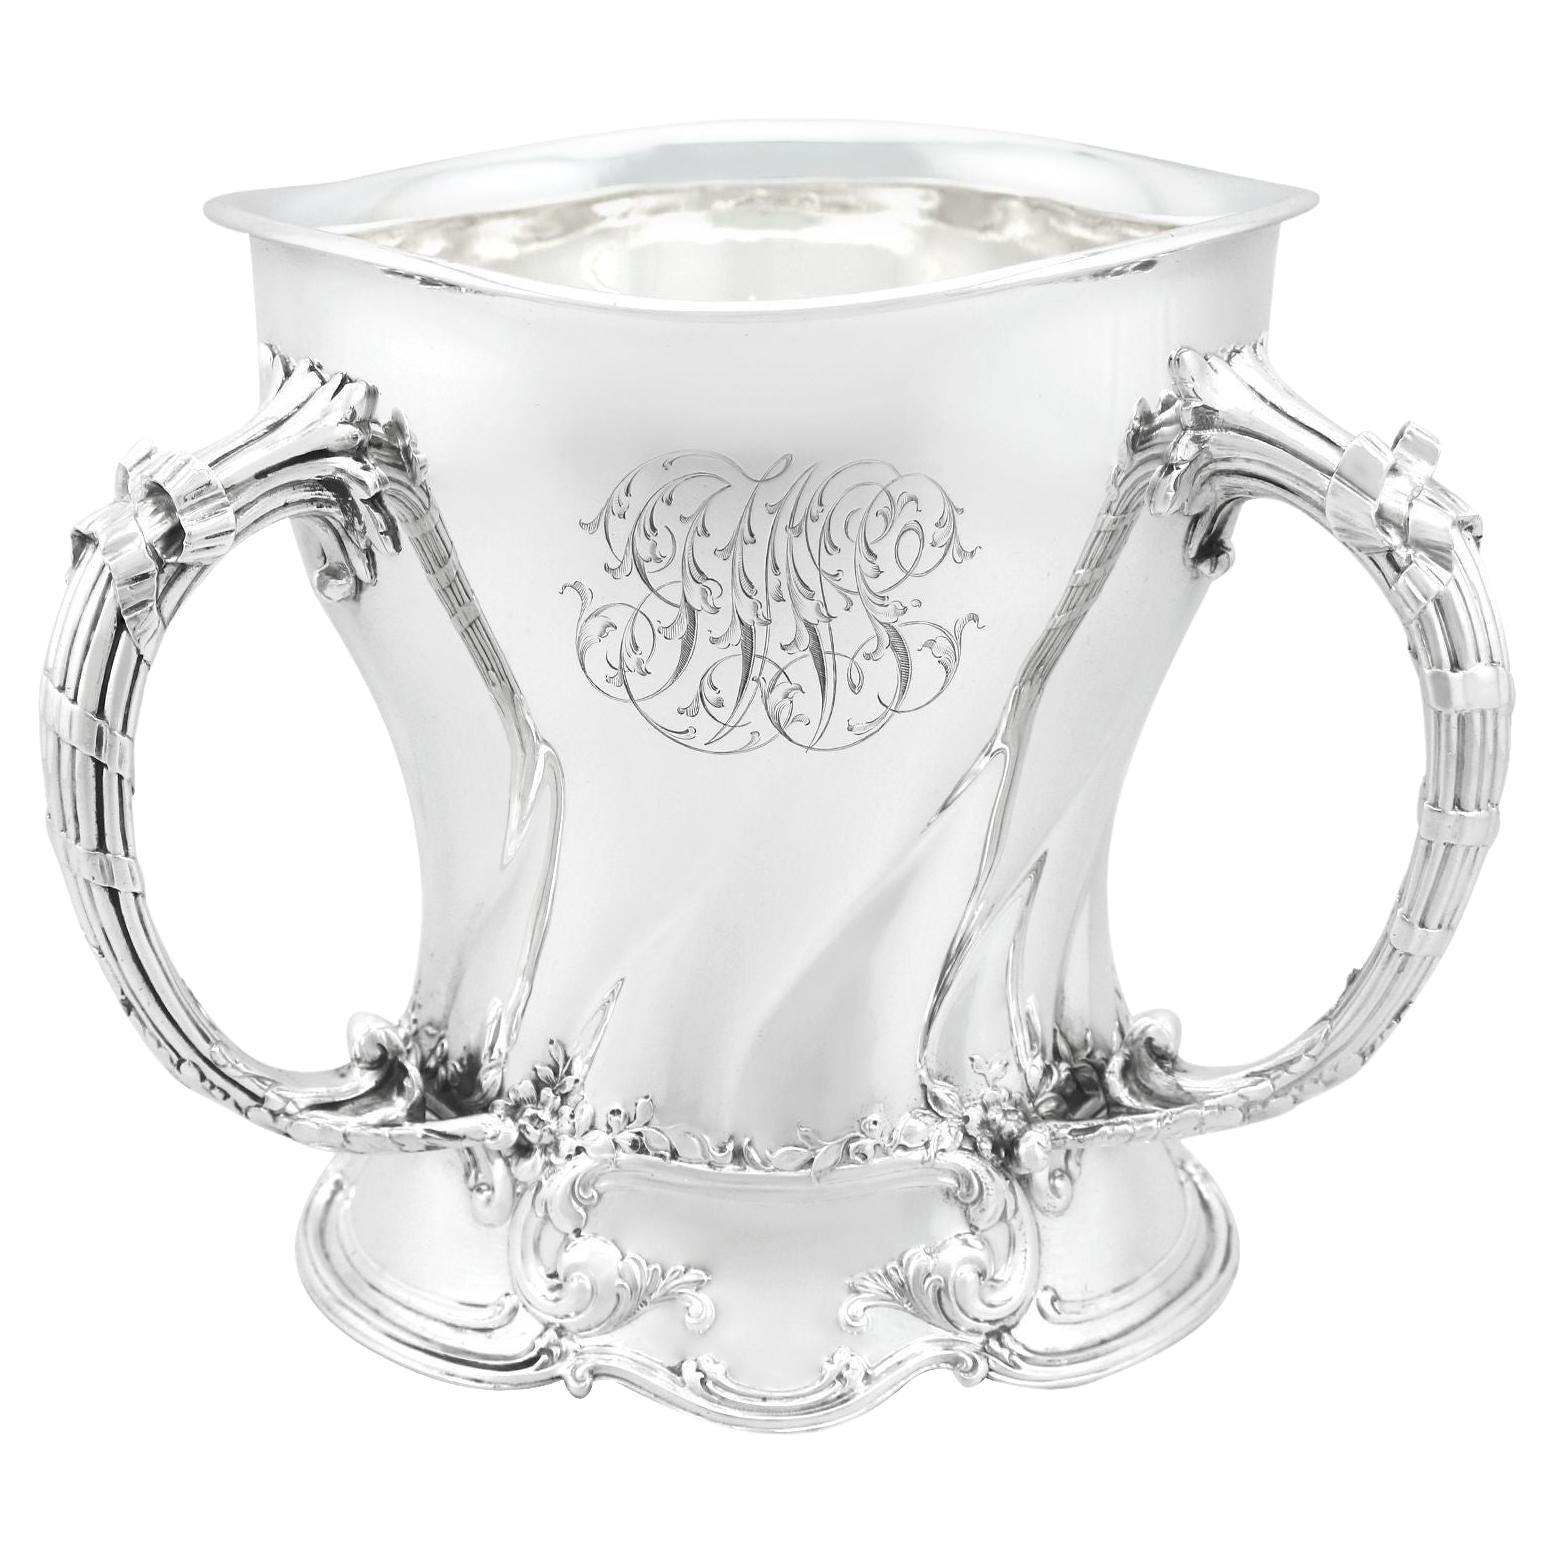 Antique Art Nouveau American Sterling Silver Tyg Presentation / Champagne Cup For Sale